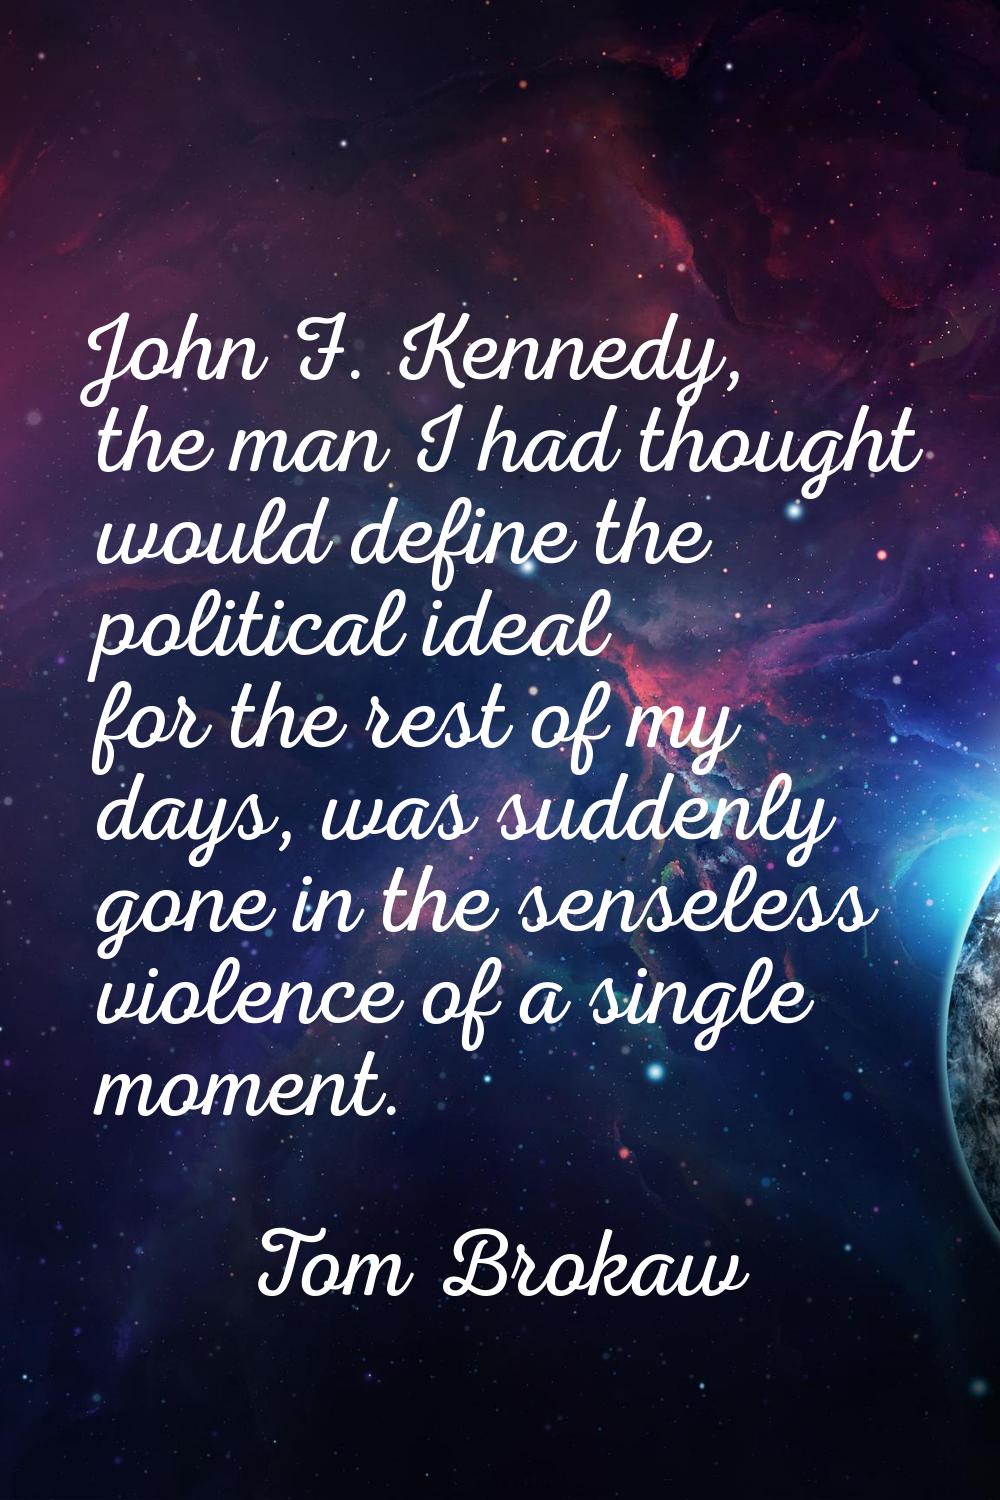 John F. Kennedy, the man I had thought would define the political ideal for the rest of my days, wa